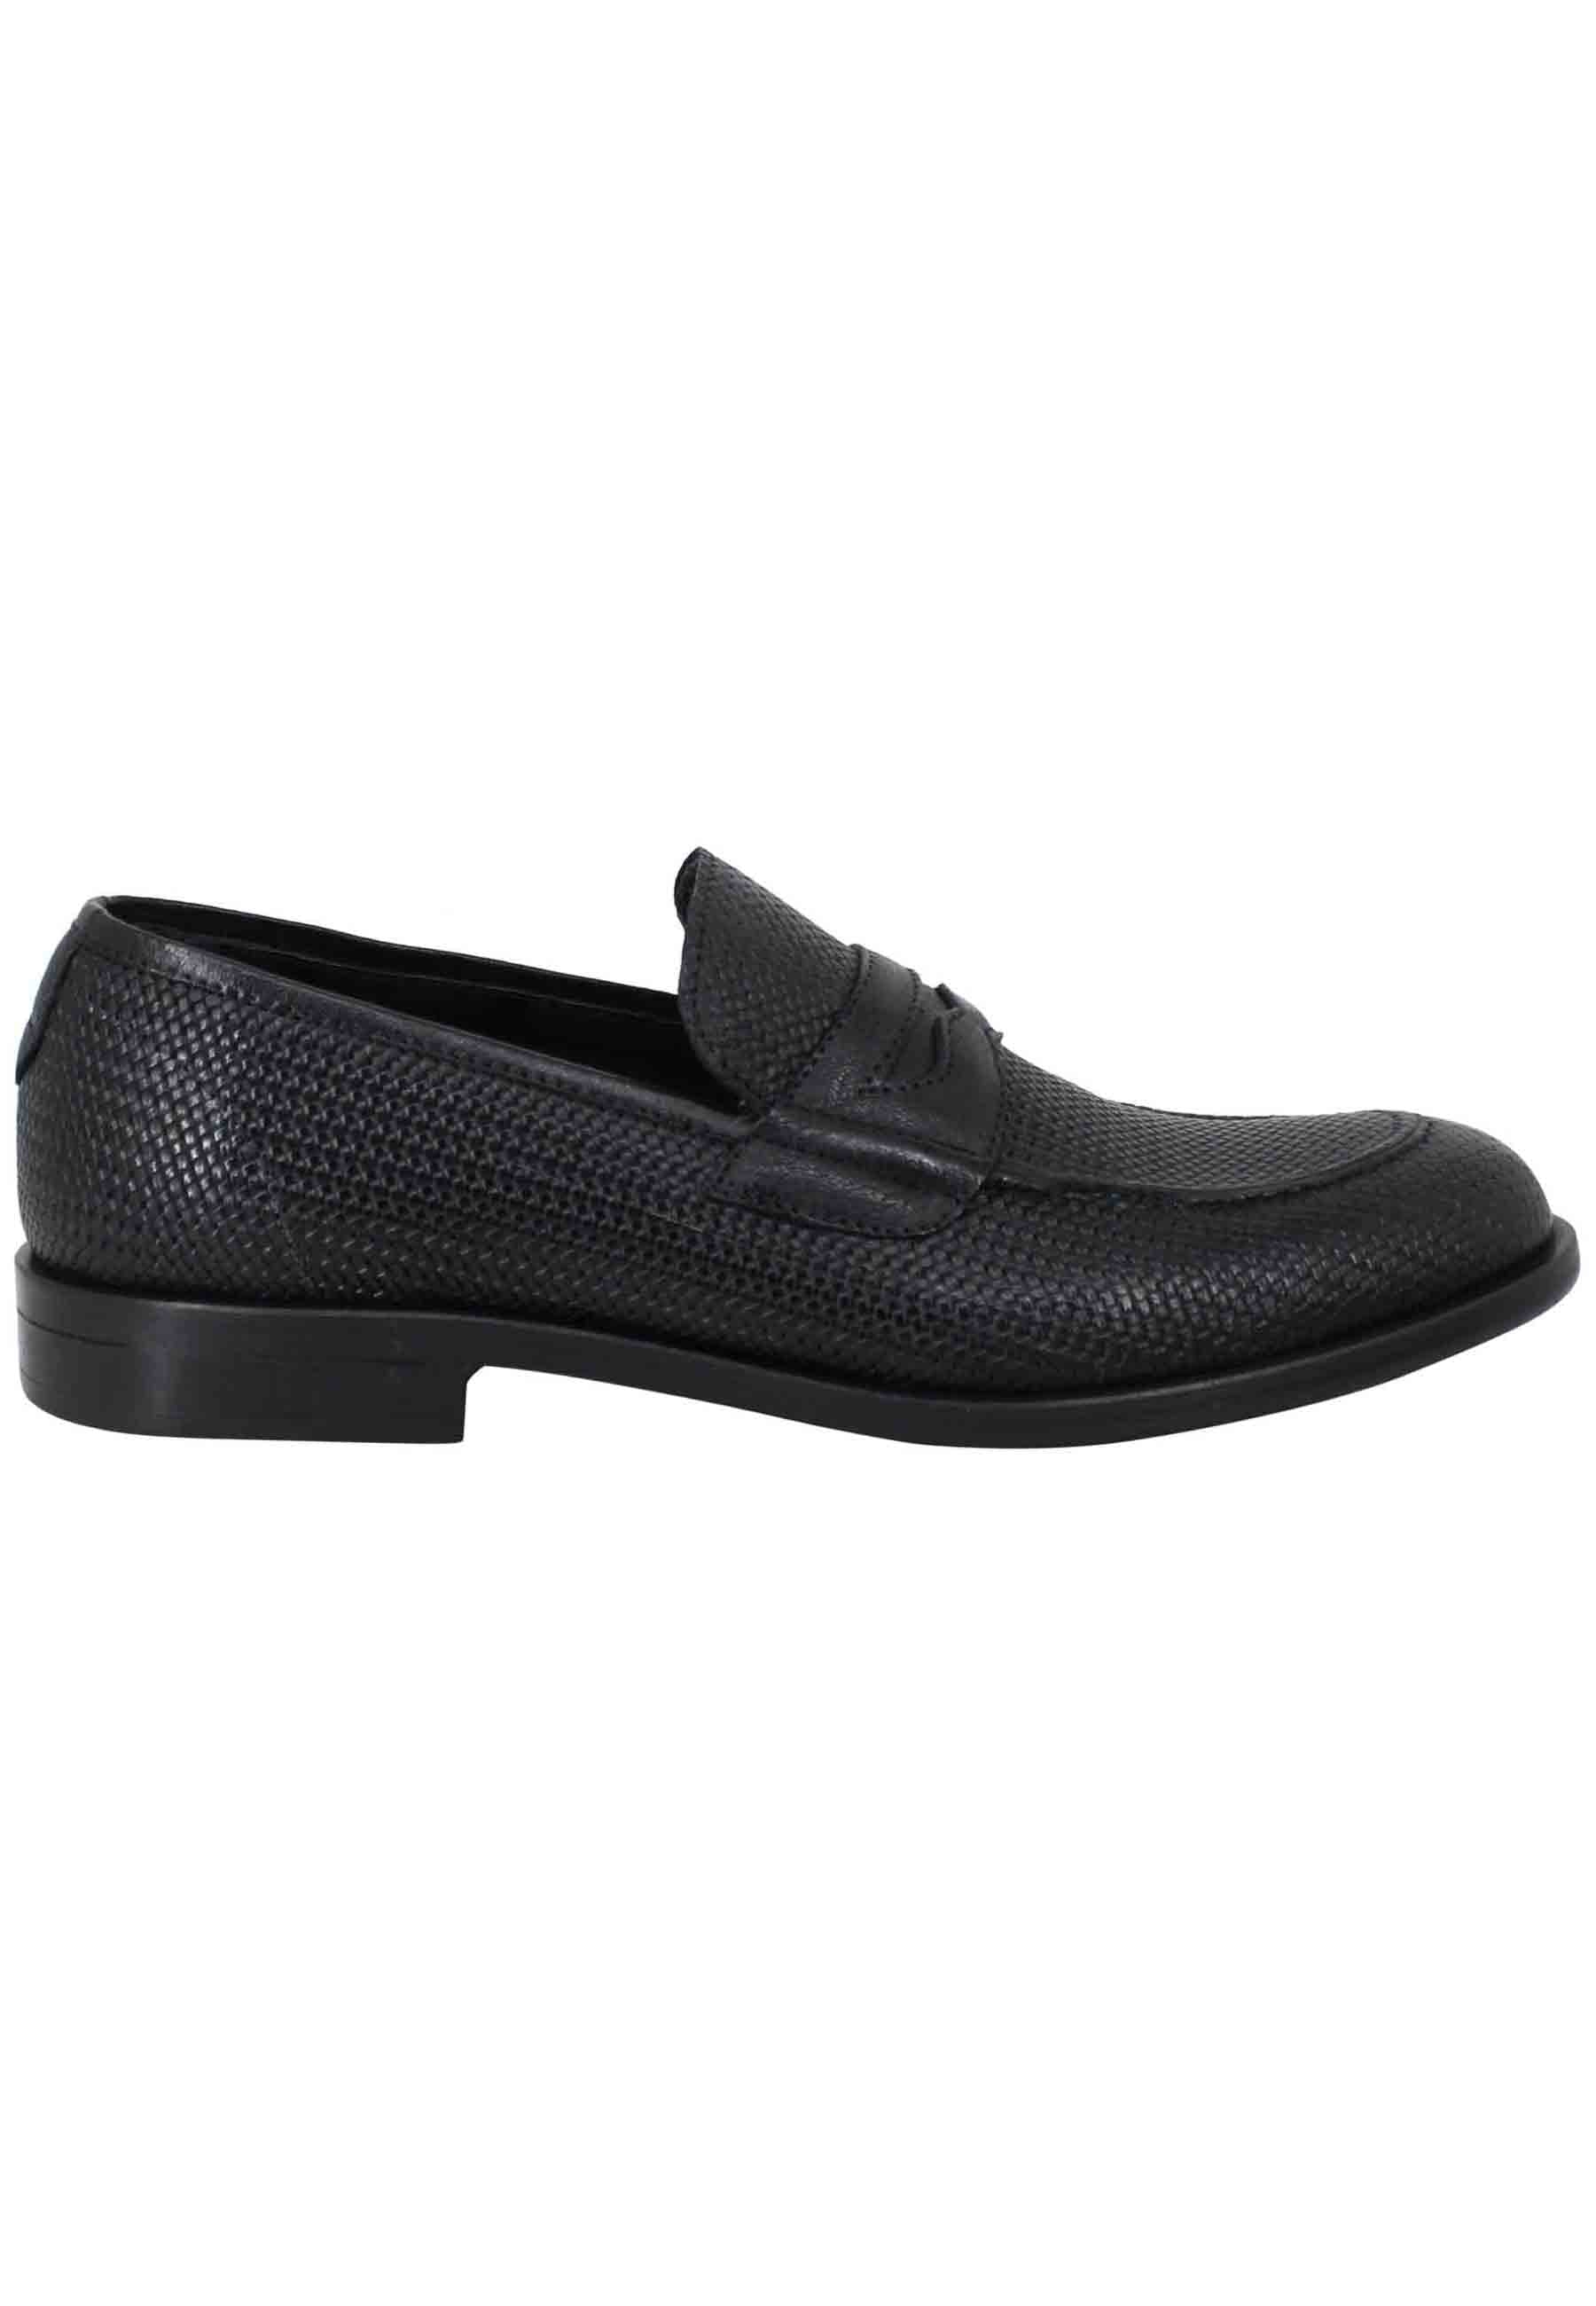 Men's black leather loafers with rubber sole